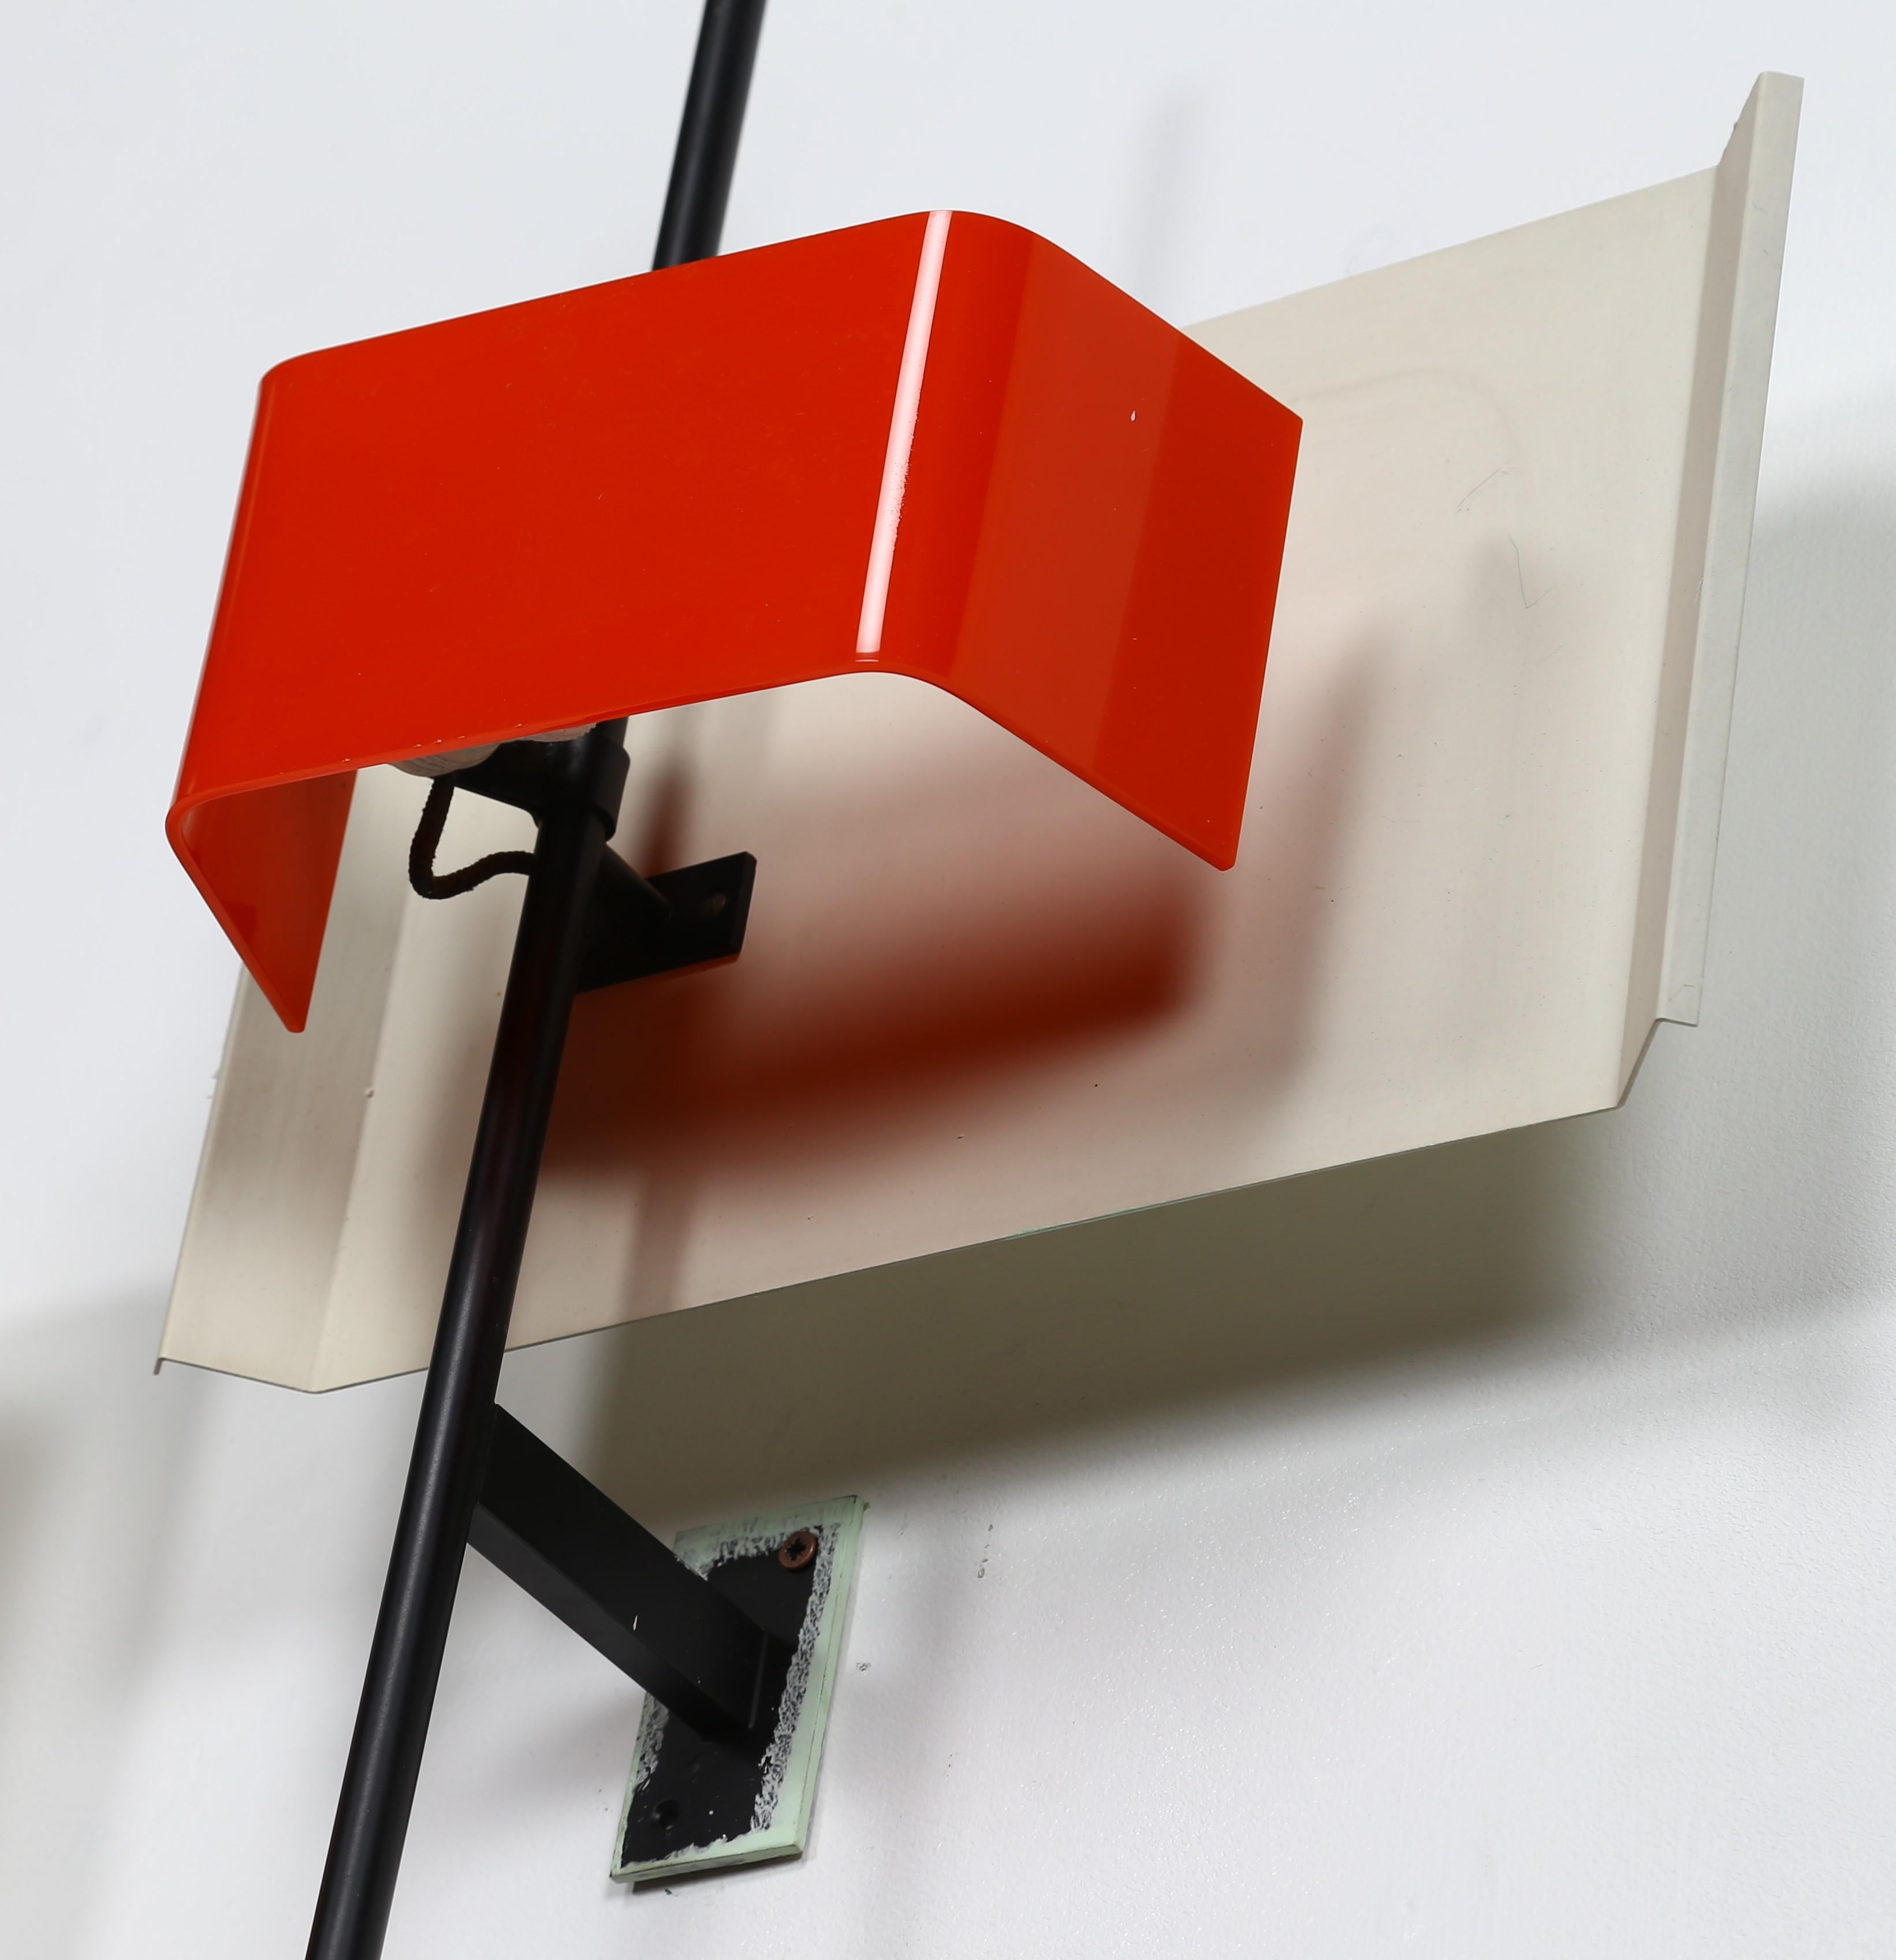 Spectacular large sized sculptural wall lamp model 2020 designed by Bruno Gatta and manufactured by Stilnovo, Italy 1955.
Minimalist wall lamp with black lacquered arm, white lacquered shade, a red plexiglass diffuser and brass details.
The lamp